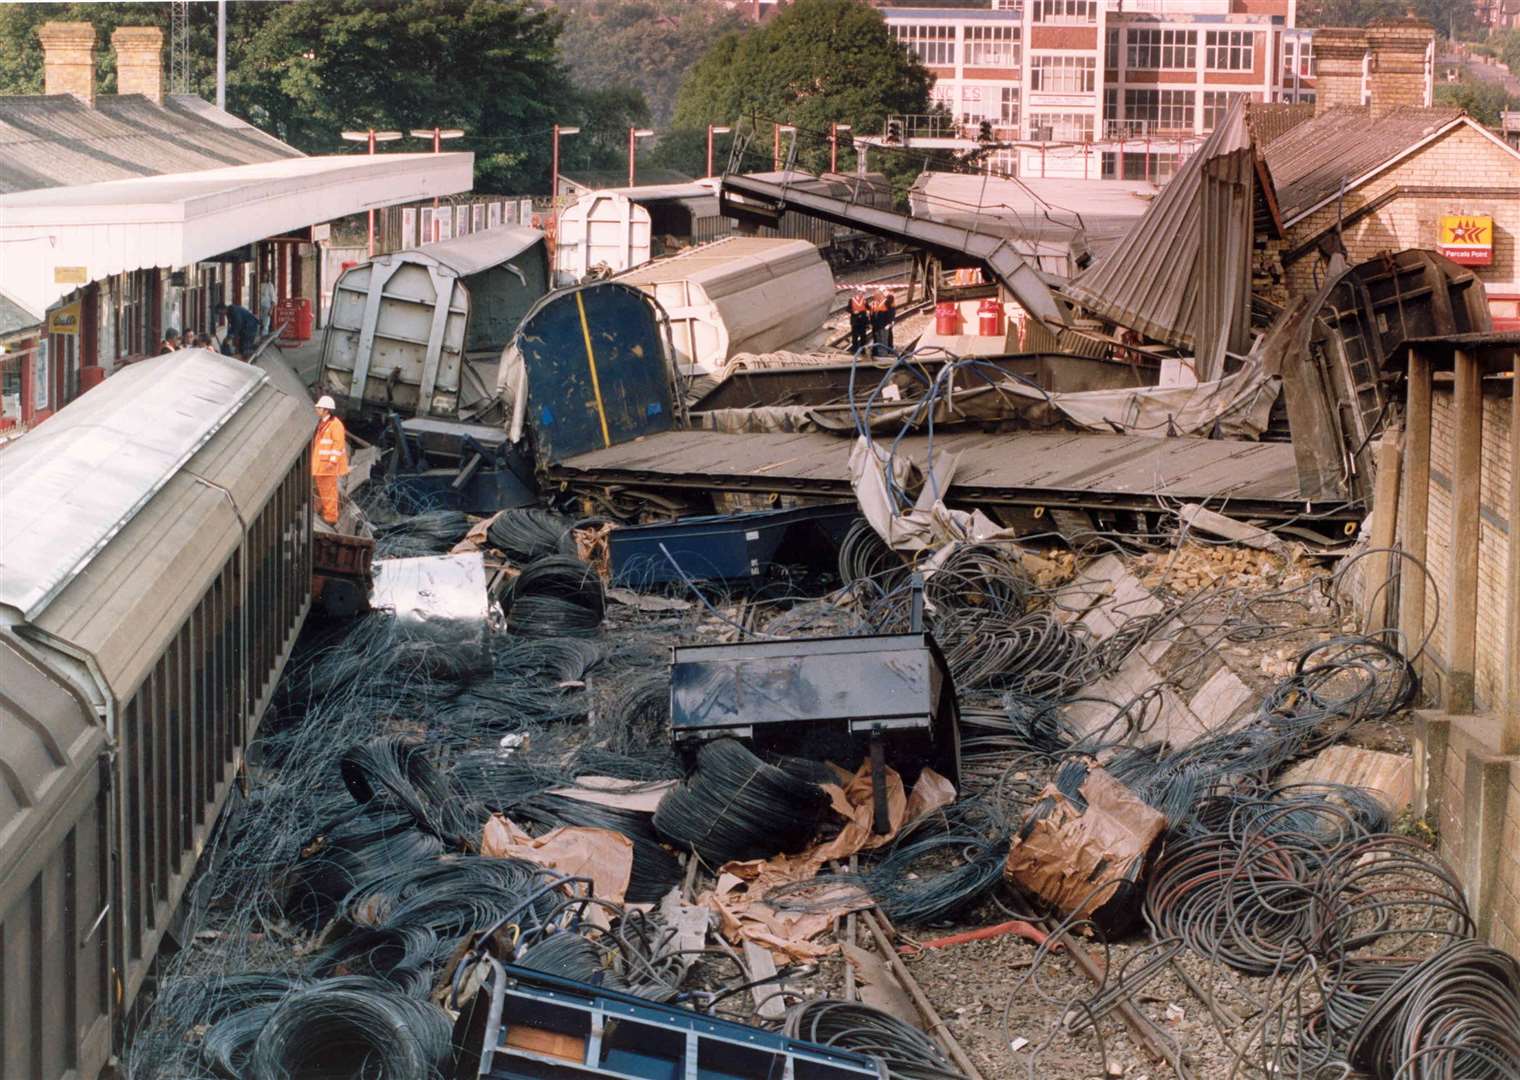 It was a scene of devastation after a freight train demolished Maidstone East station in 1993